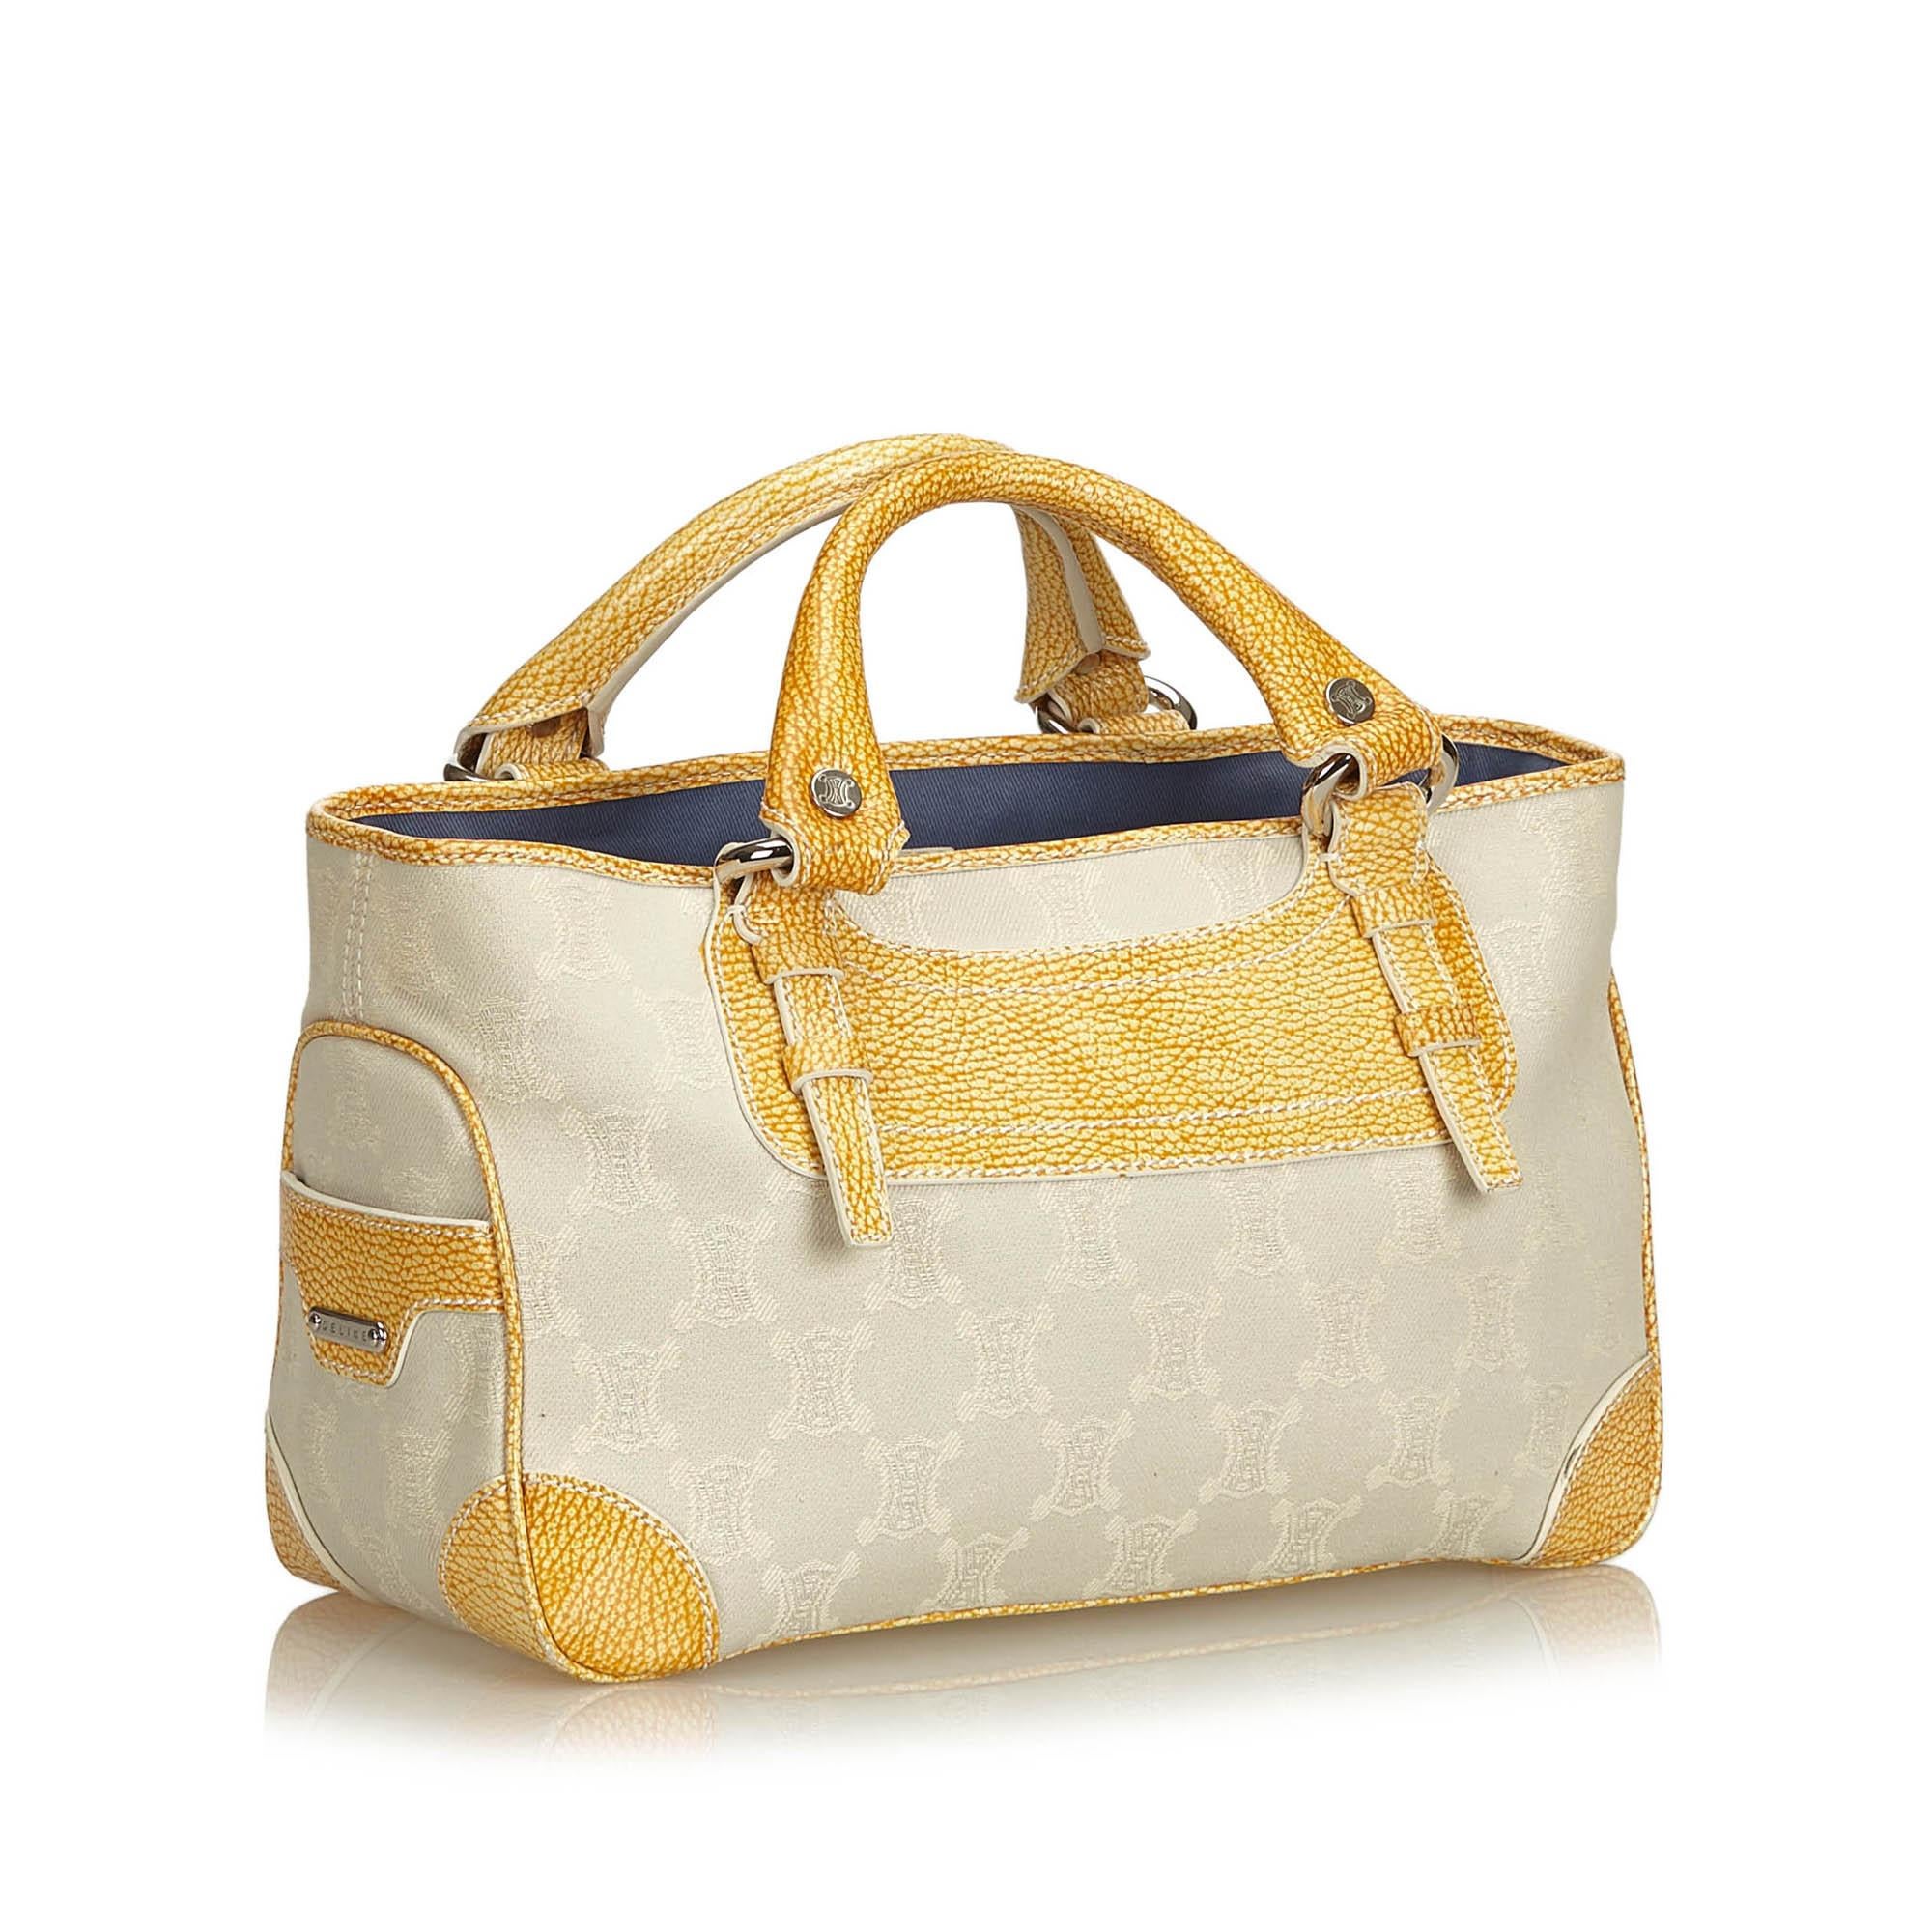 The Boogie features a jacquard body, rolled leather handles, exterior zip pockets, an open top, an interior zip compartment, and an interior slip pocket.

It carries a AB condition rating.

Dimensions: 
Length 20.00 cm
Width 40.00 cm
Depth 13.00